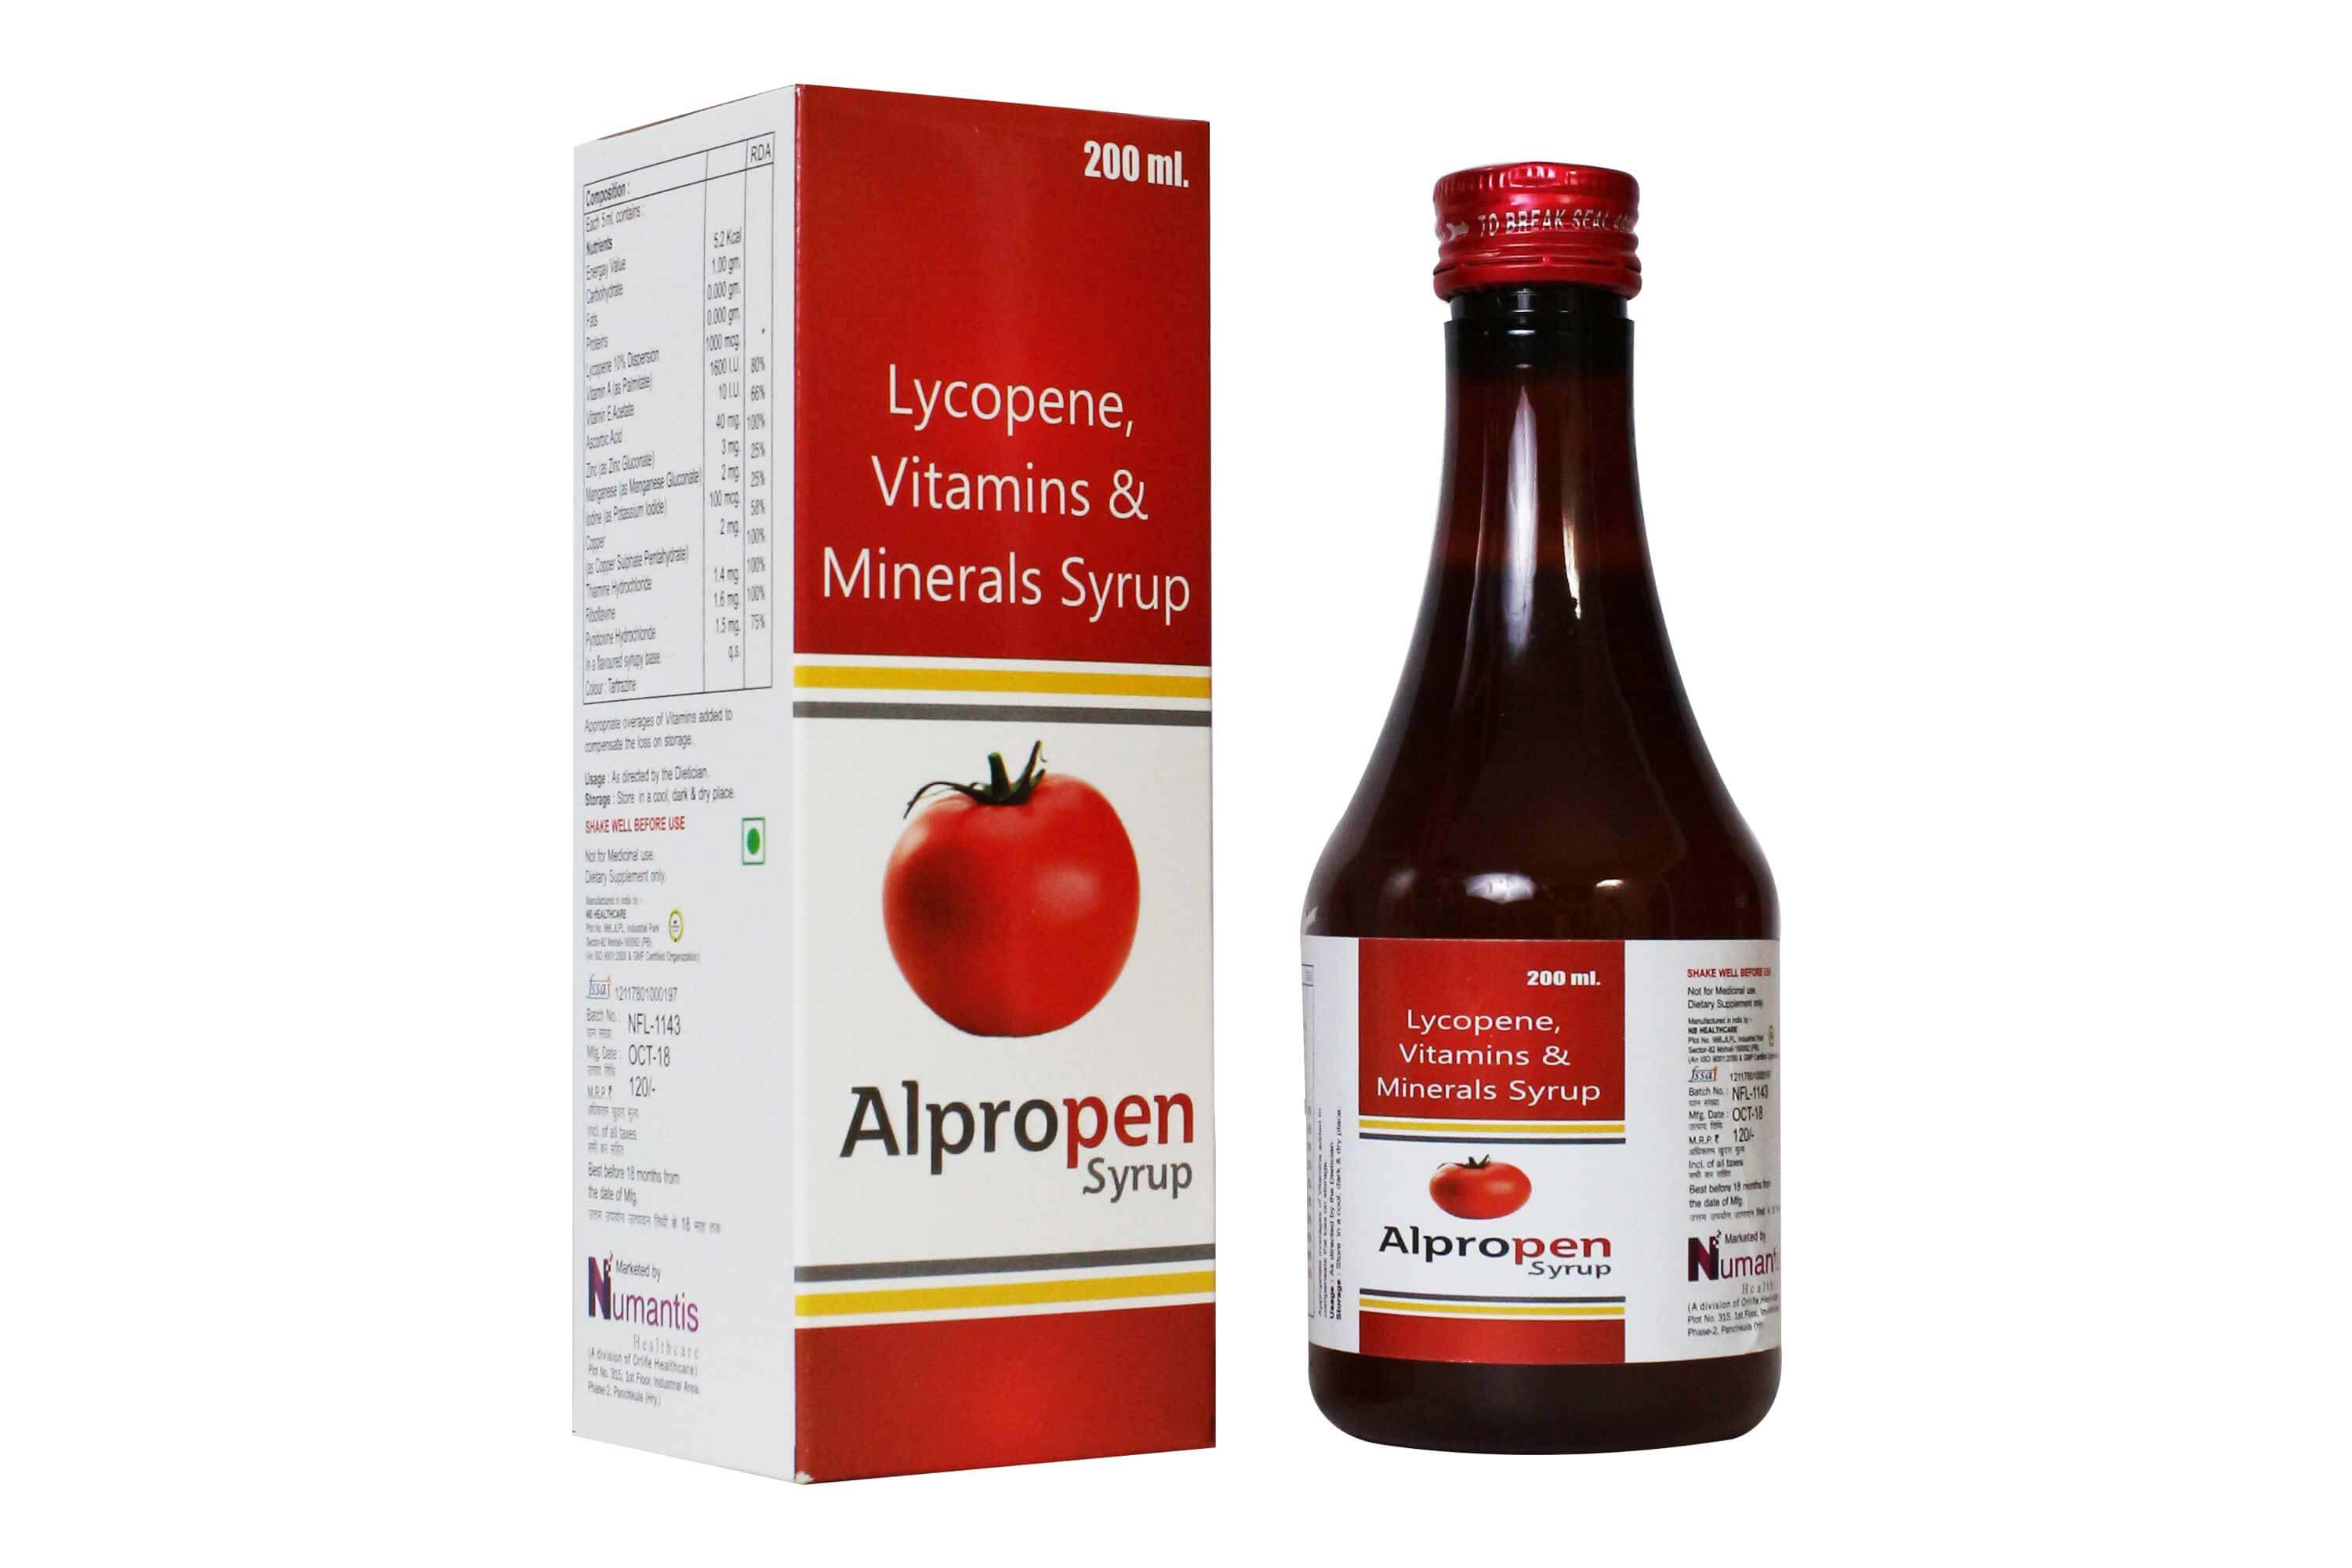 Product Name: Alpropen Syrup, Compositions of Alpropen Syrup are Lycopene, Vitamin & Minerals Syrups - Numantis Healthcare